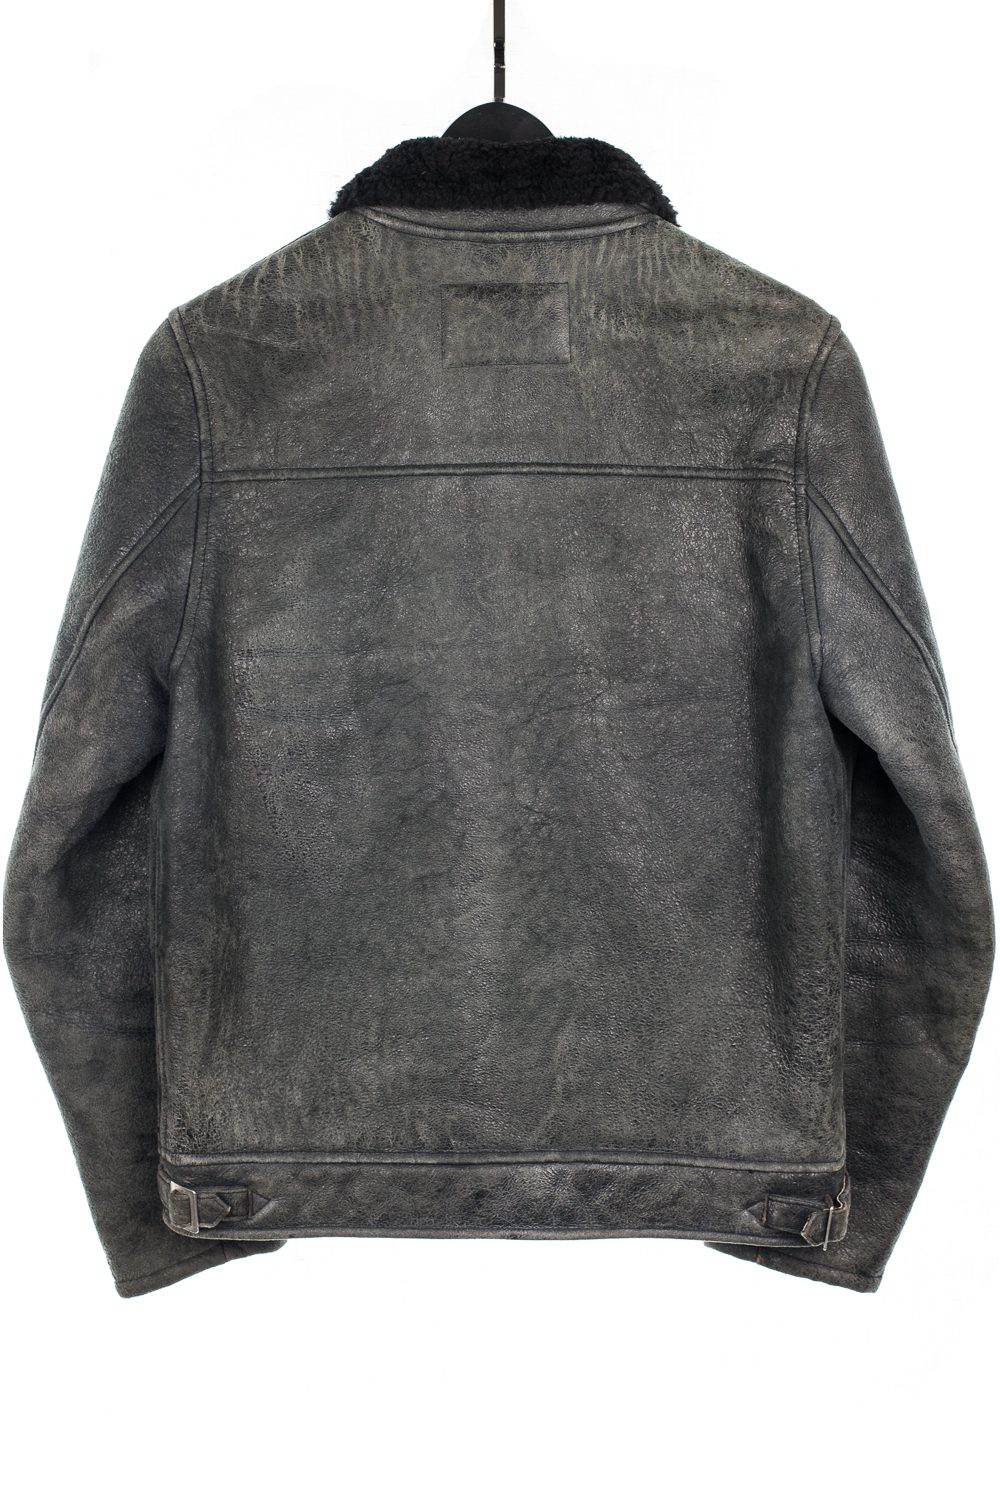 AW02 “Witch’s Cell Division” Cracked Shearling Blouson